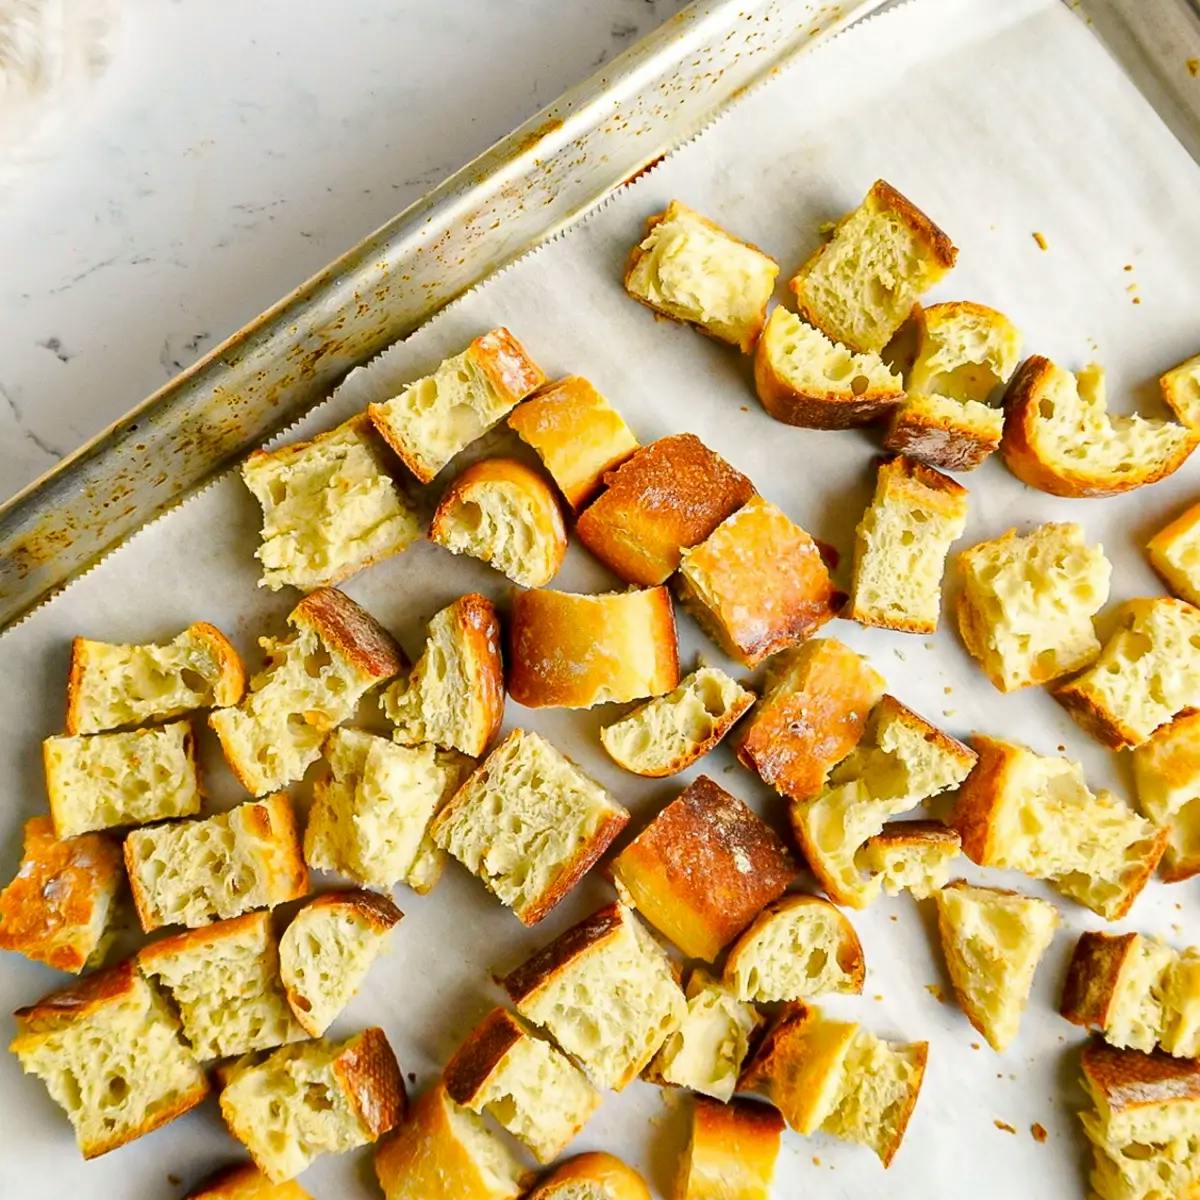 Toasting bread cubes in the oven ready for a vegan stuffing recipe.